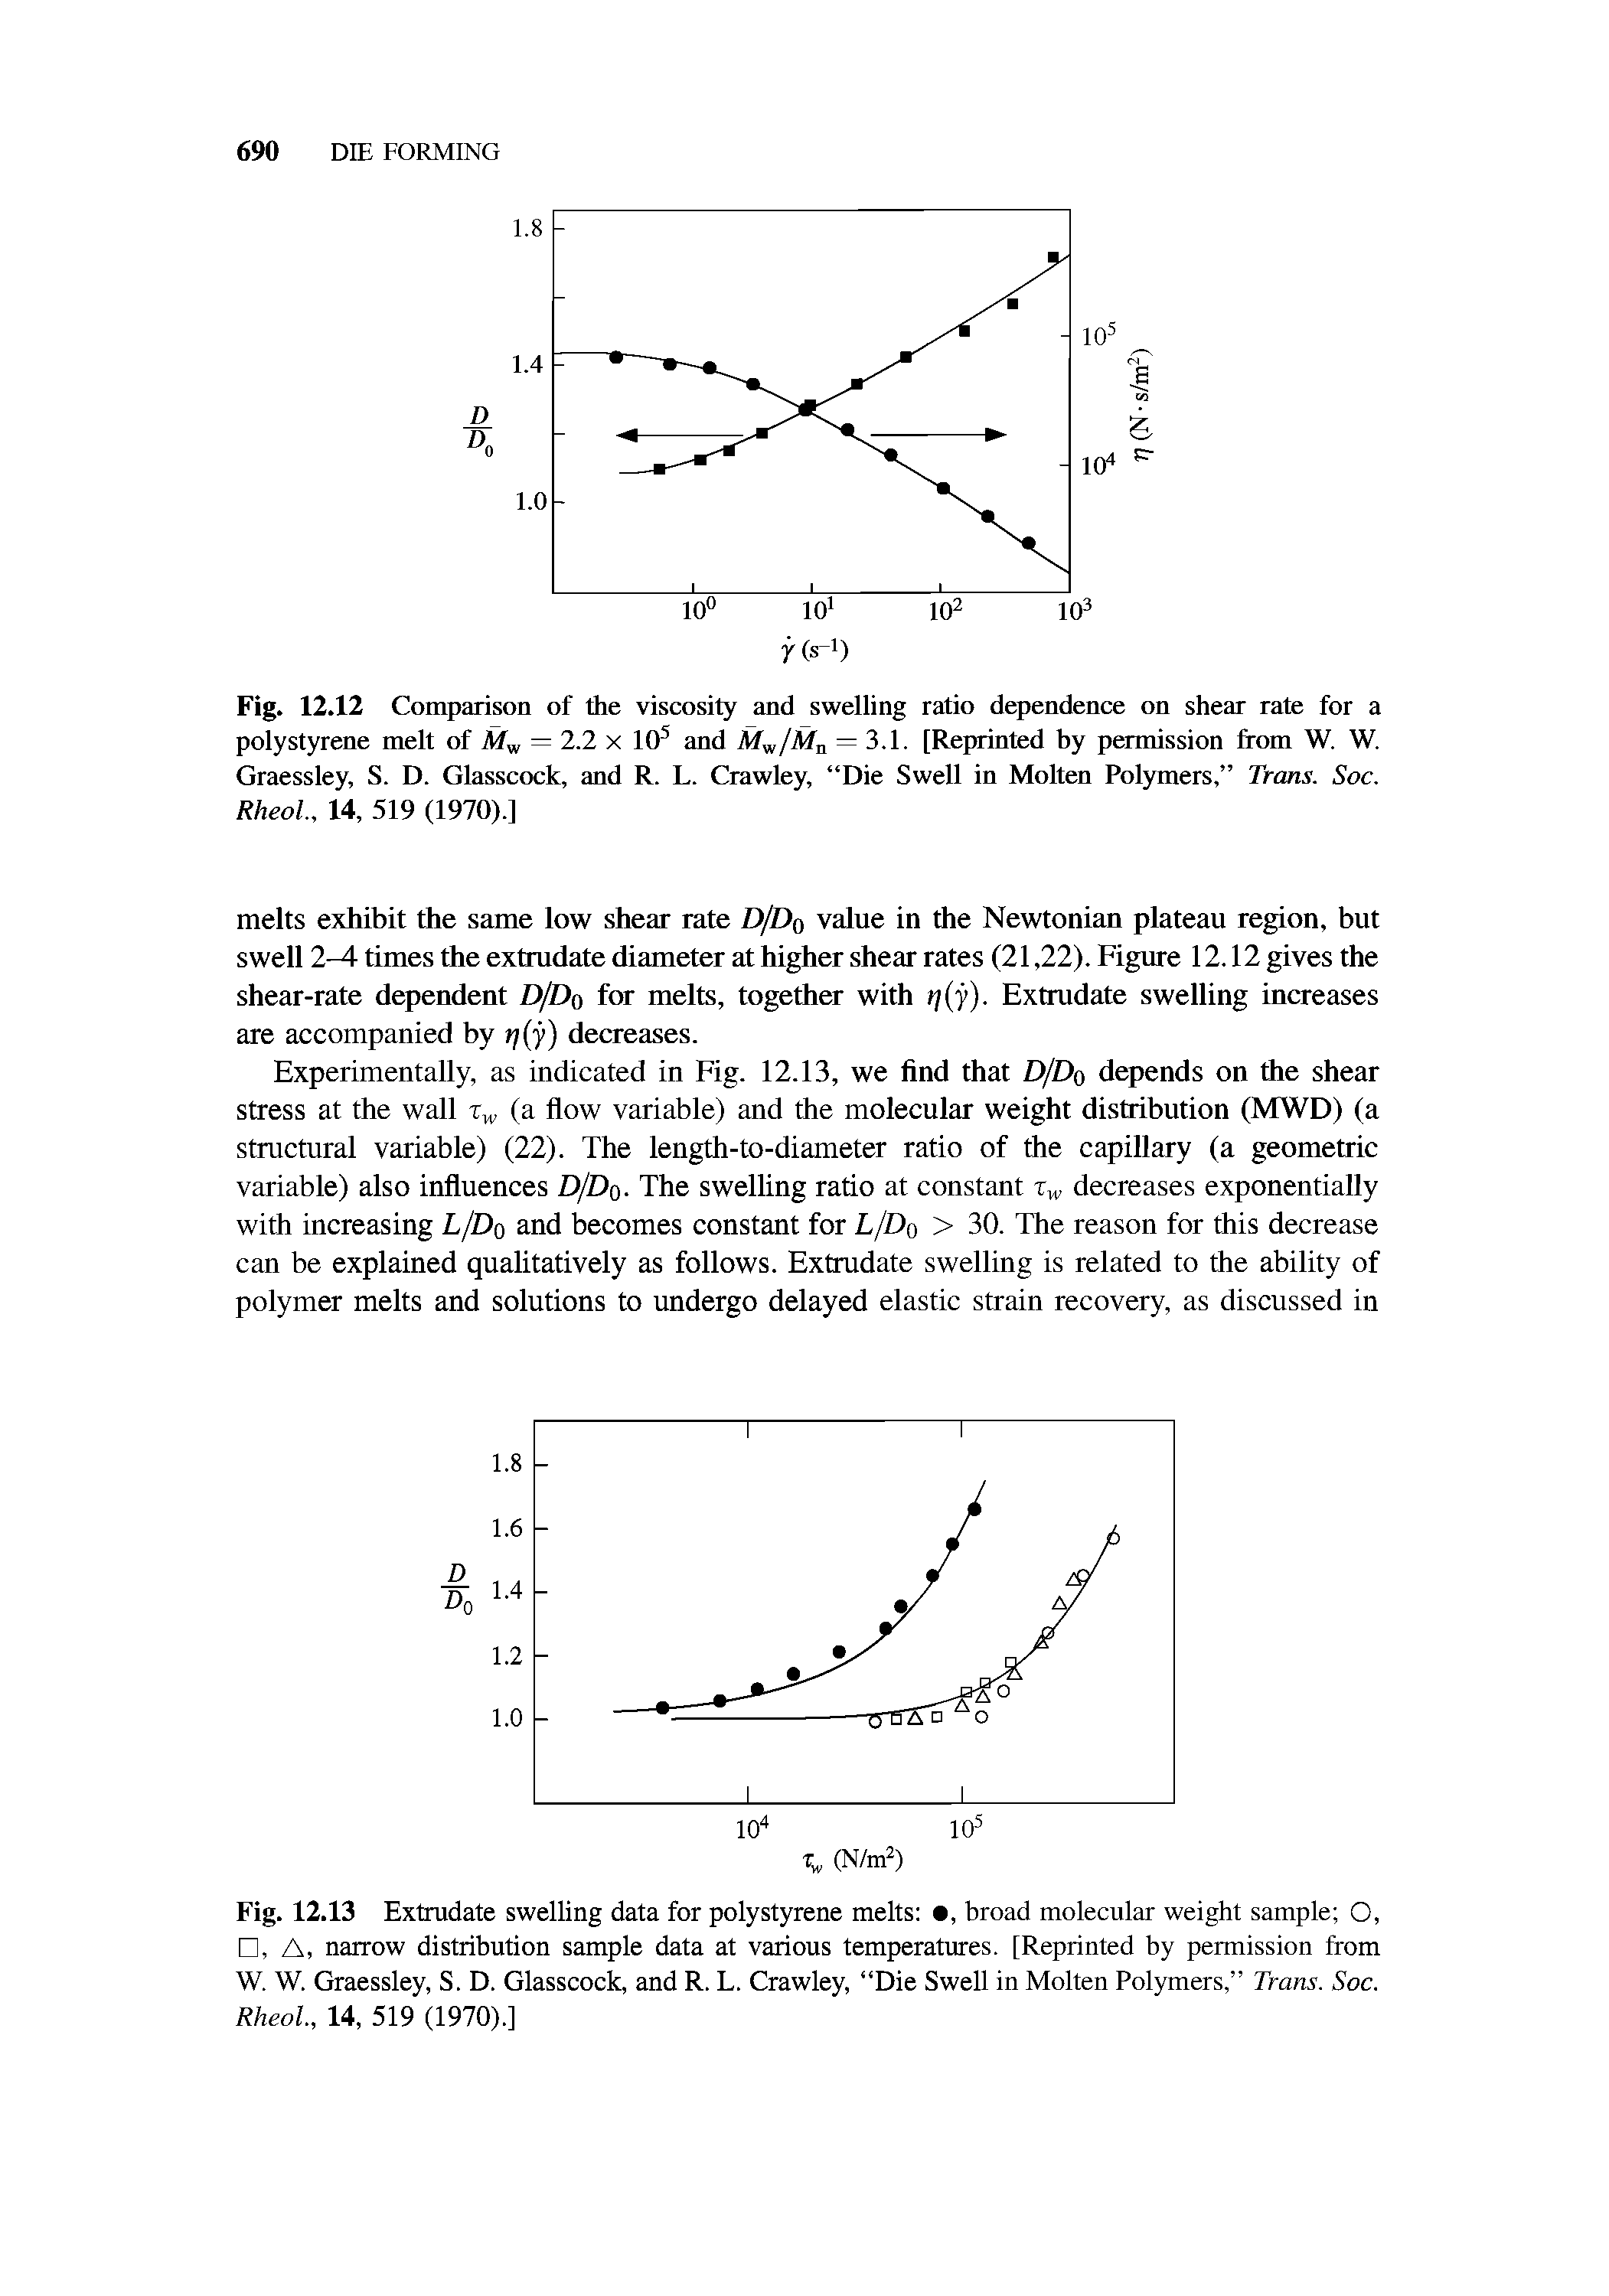 Fig. 12.12 Comparison of the viscosity and swelling ratio dependence on shear rate for a polystyrene melt of Mw = 2.2 x 105 and Mw/Mn = 3.1. [Reprinted hy permission from W. W. Graessley, S. D. Glasscock, and R. L. Crawley, Die Swell in Molten Polymers, Trans. Soc. Rheol., 14, 519 (1970).]...